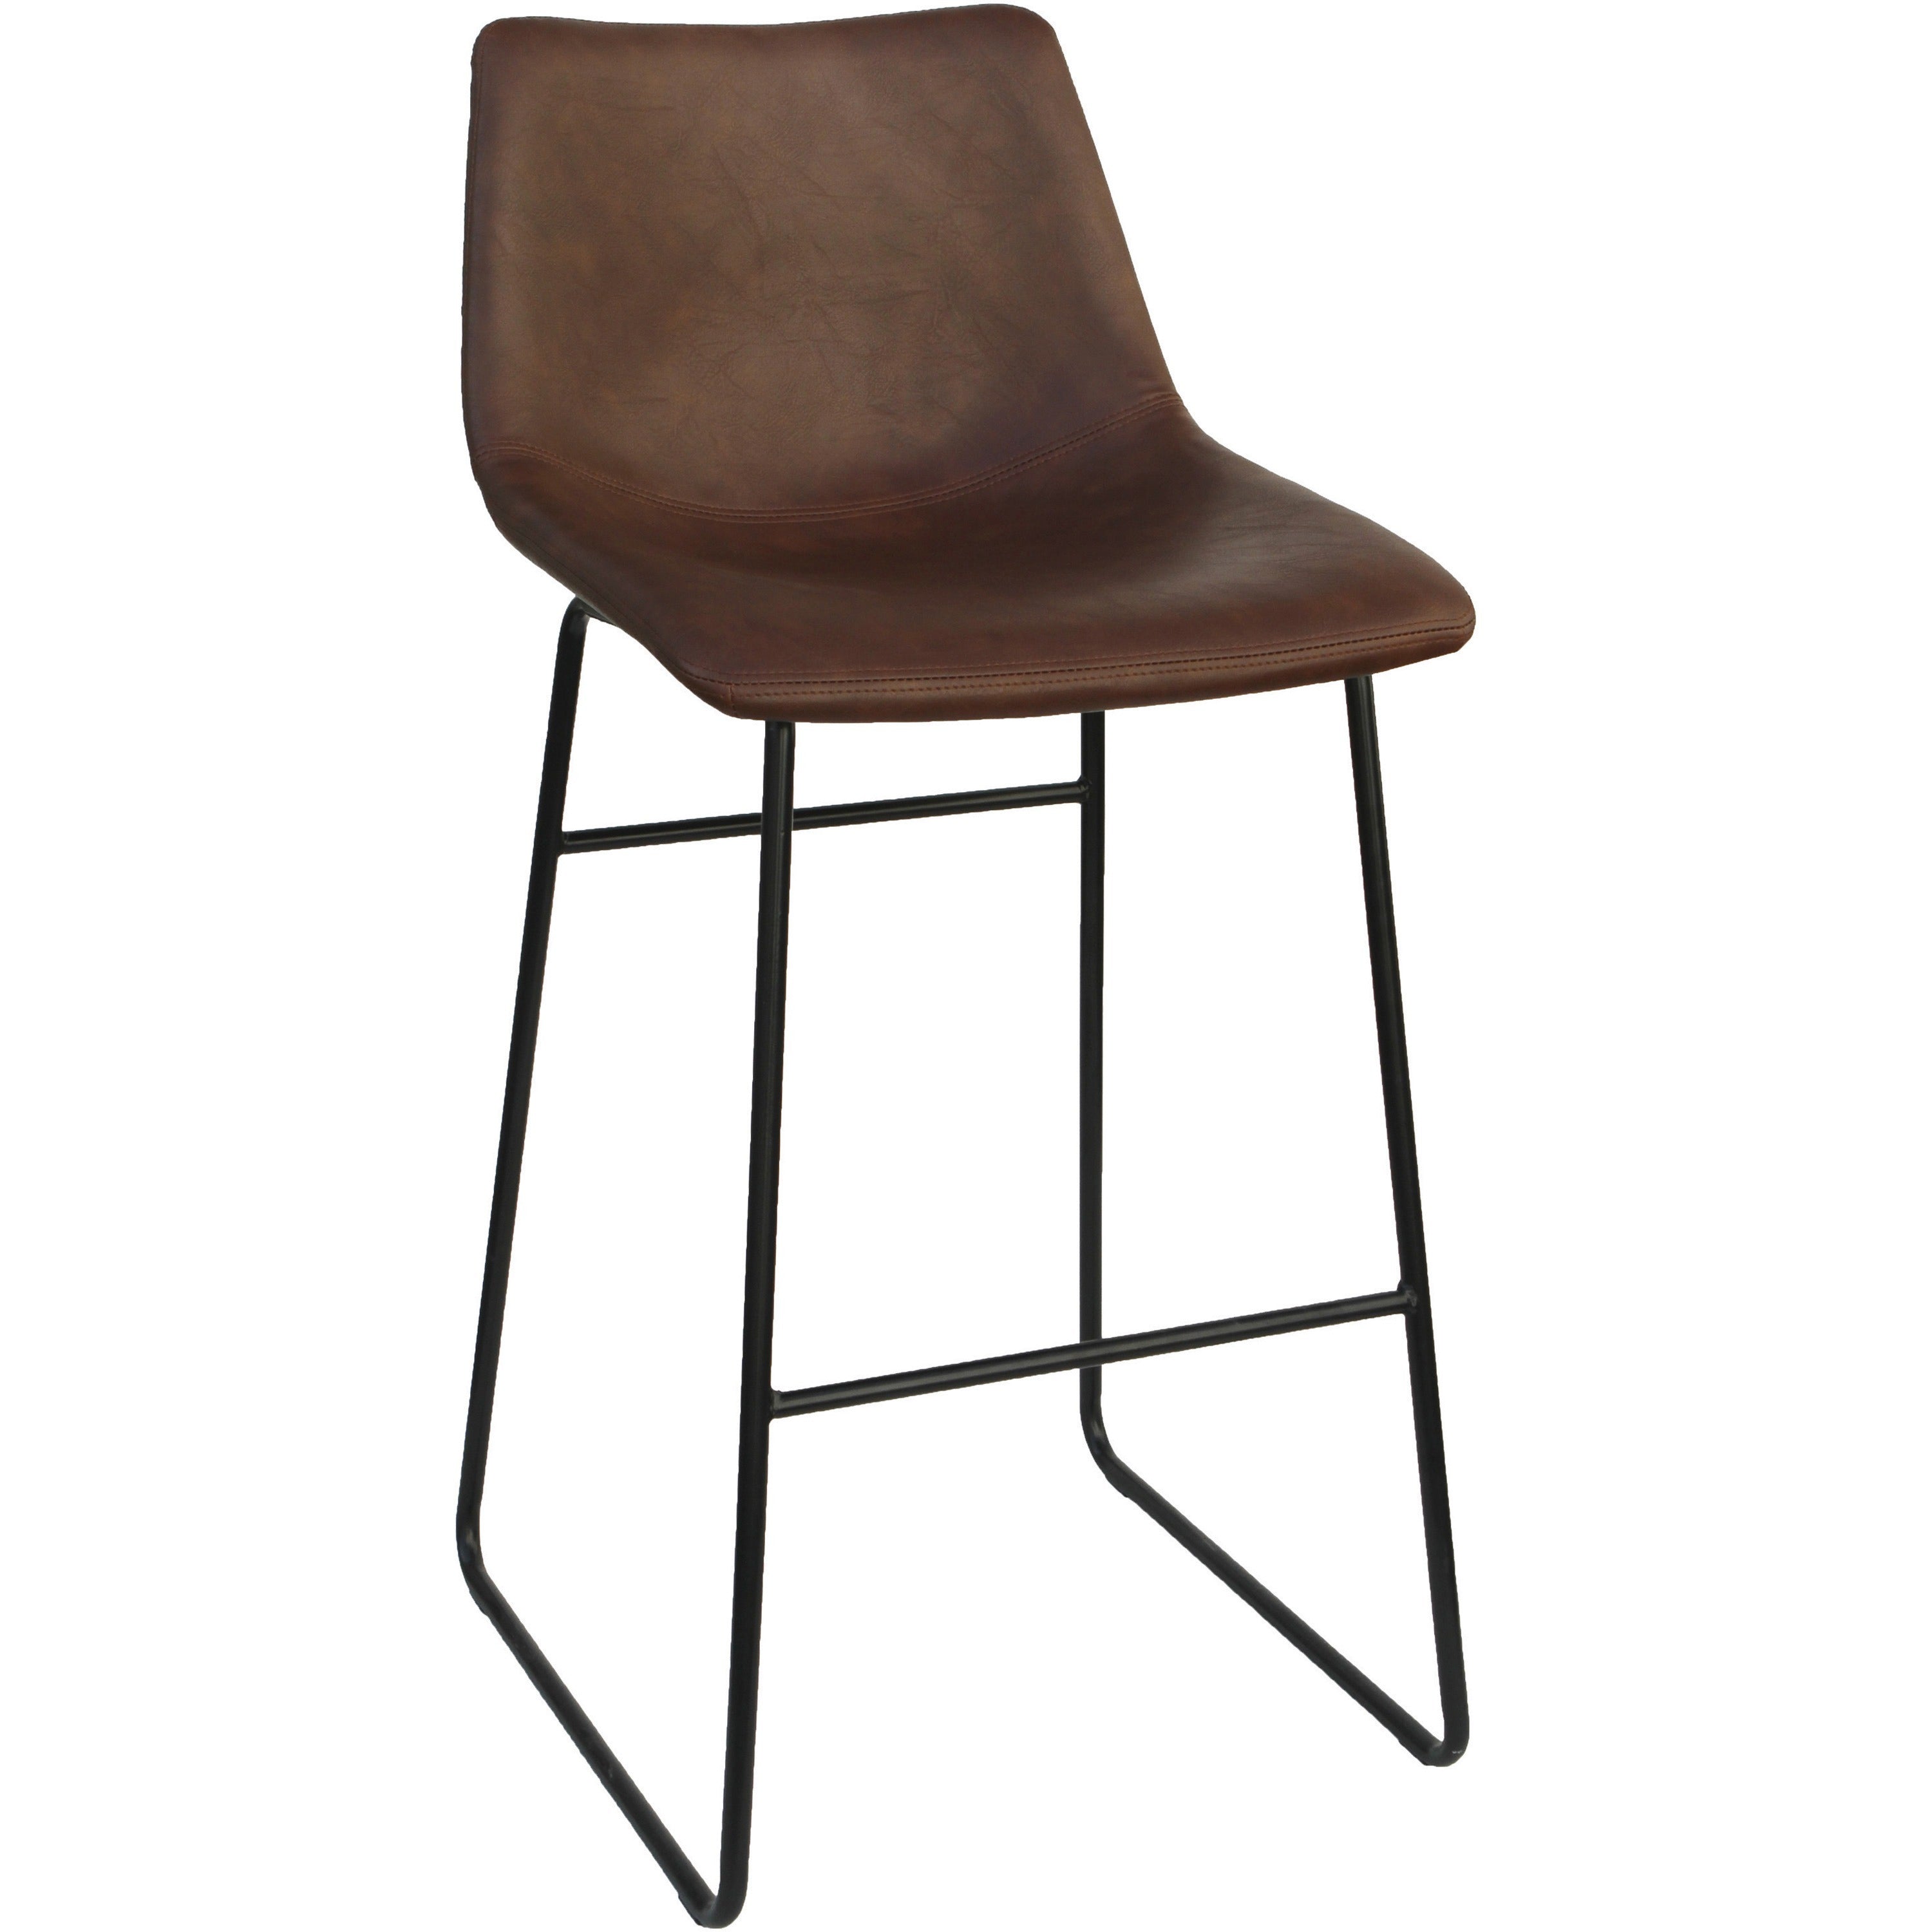 lorell-sled-guest-stools-tan-bonded-leather-seat-mid-back-sled-base-tan-bonded-leather-2-carton_llr42958 - 1